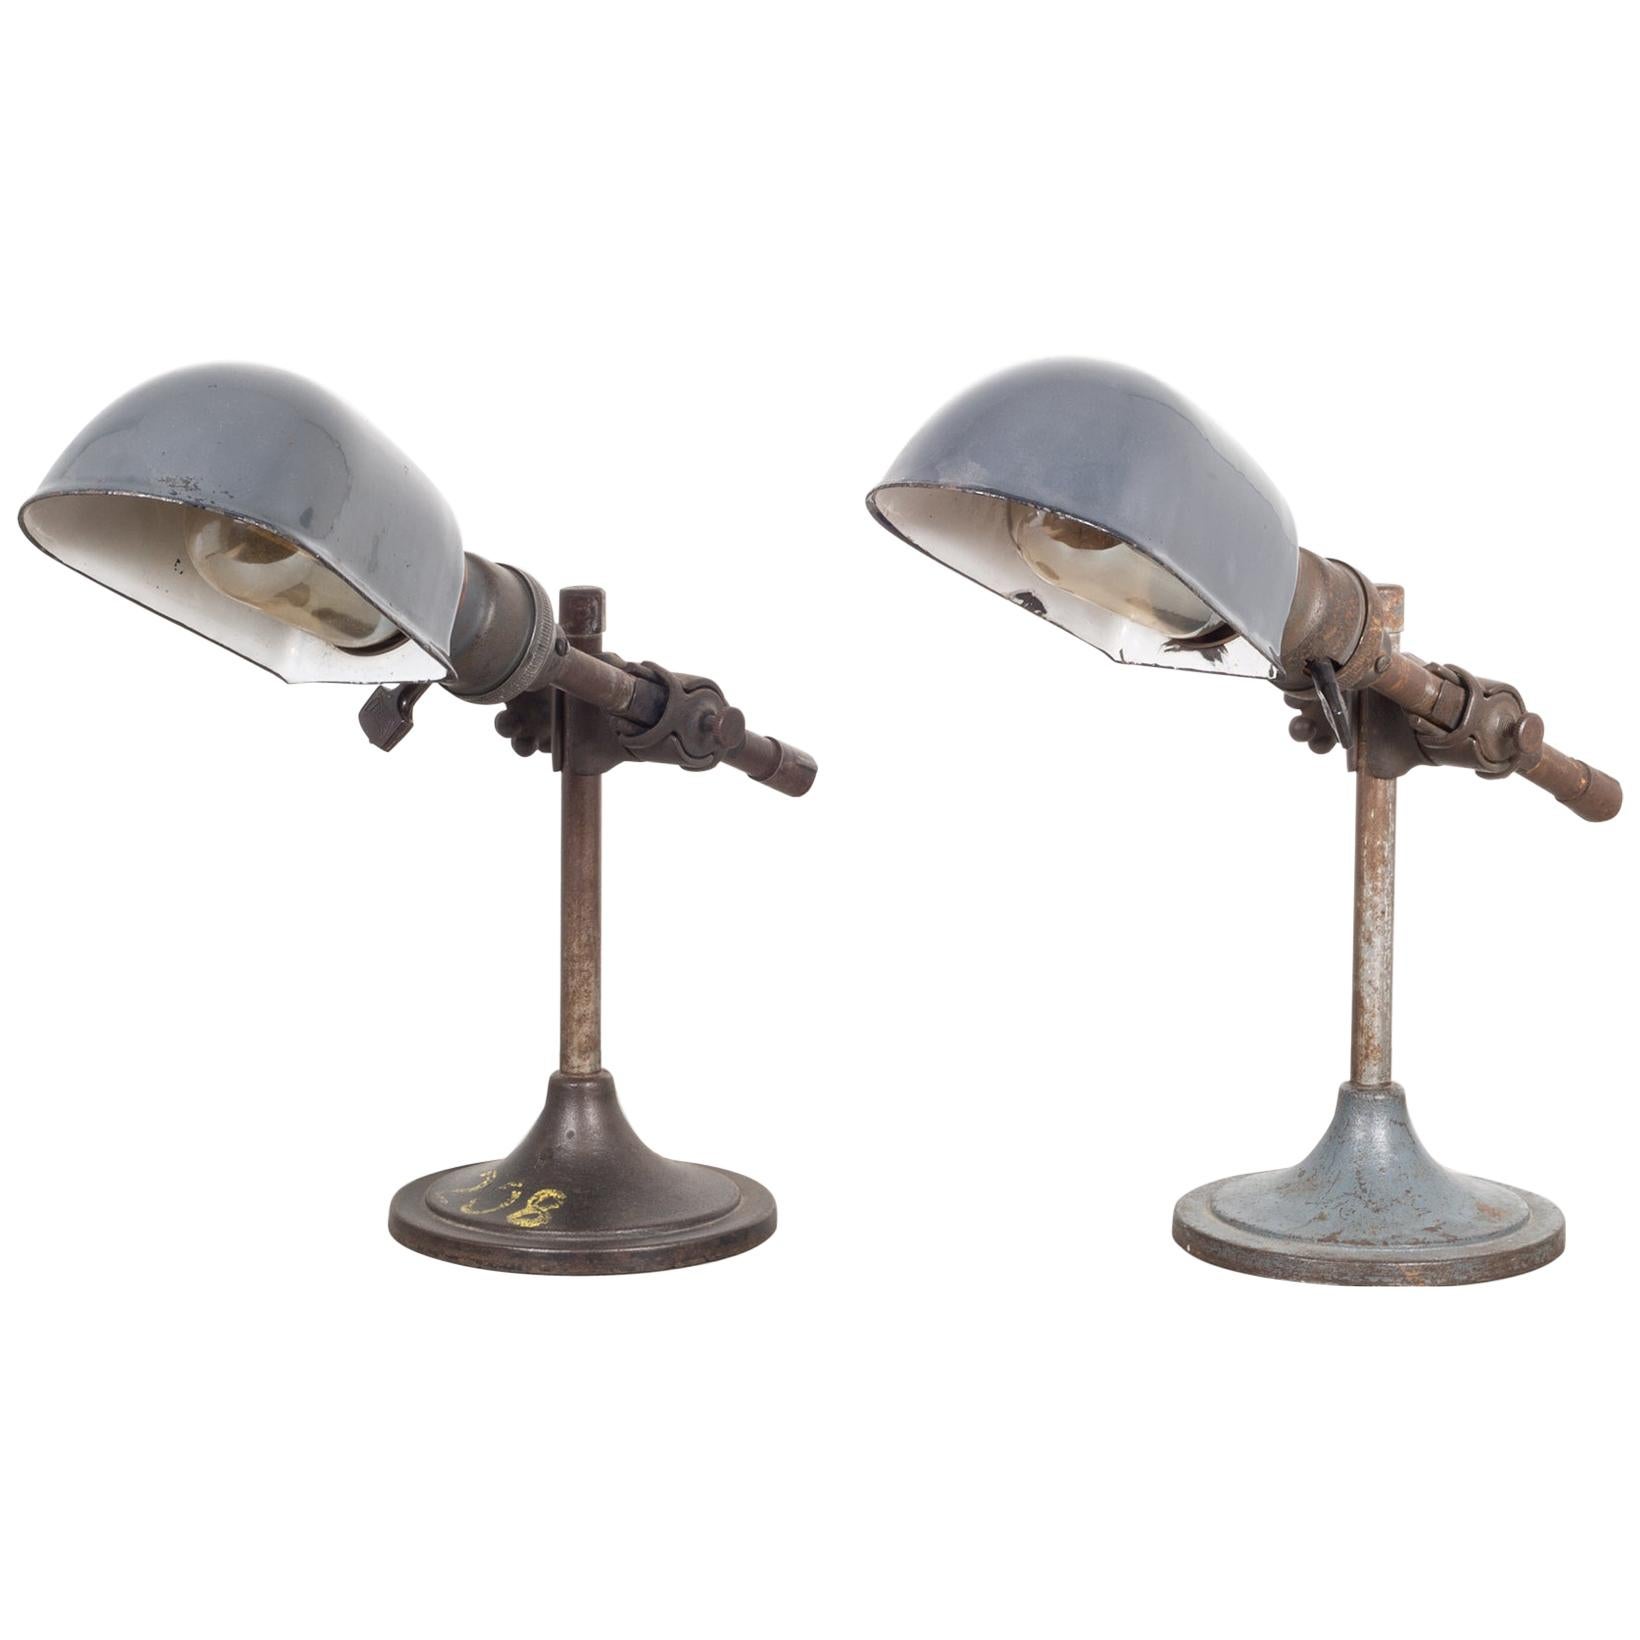  Industrial Task Lamp with Porcelain Shade, circa 1930